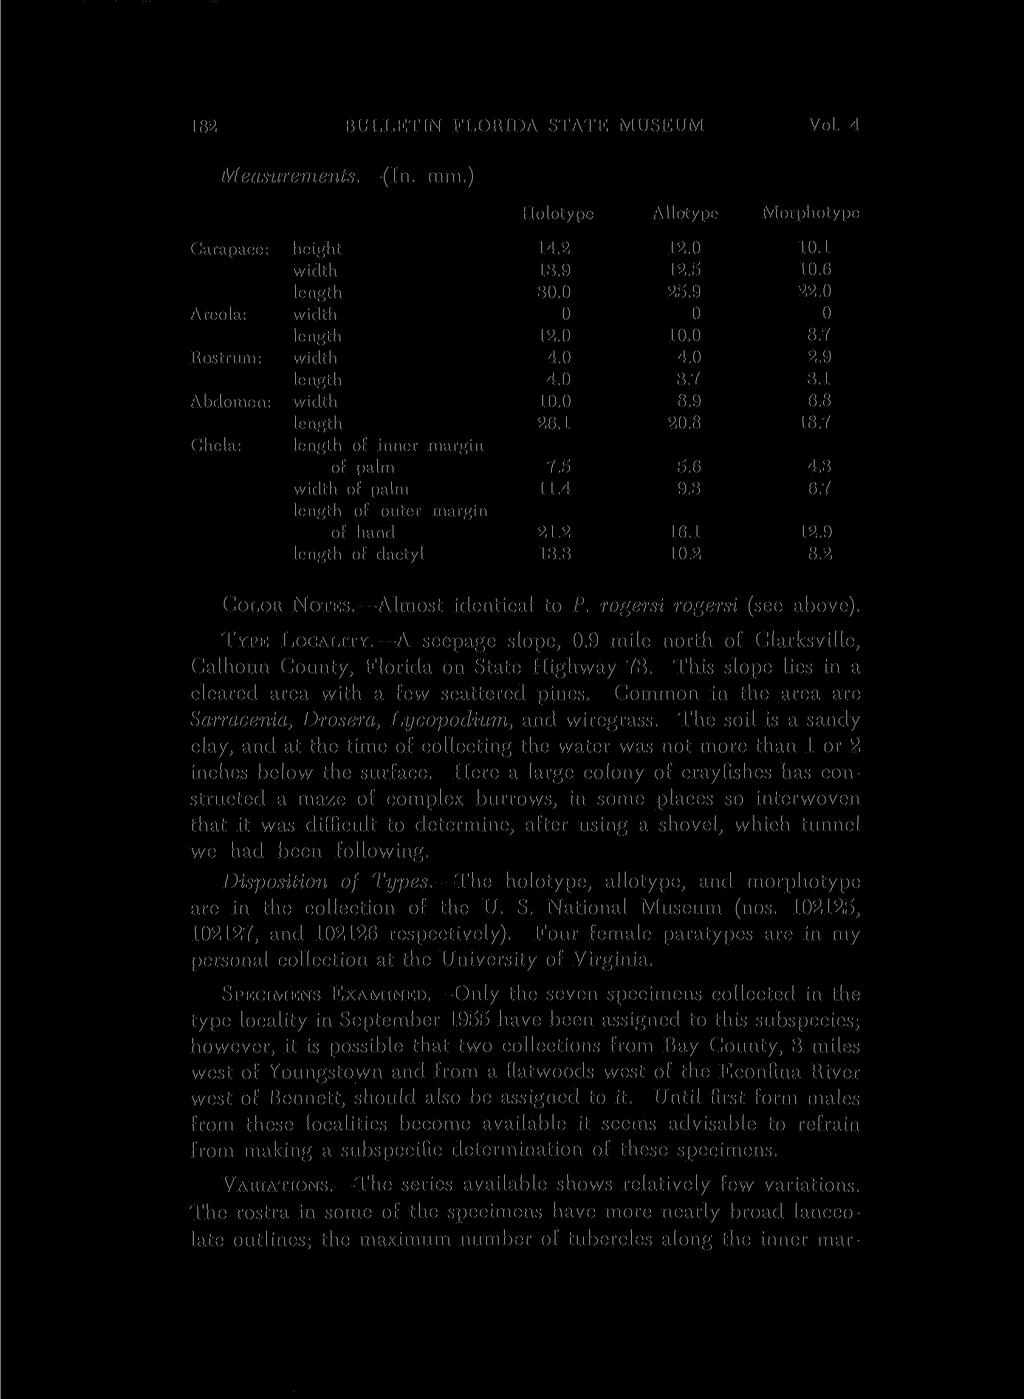 182 BULLETIN FLORIDA STATE MUSEUM Vol. 4 Measurements. (In. mm.) Holotype Allotype Morphotype Carapace: height 14.2 12.0 10.1 width 13.9 12.5 10.6 length 30.0 25.9 22.0 Areola: width 0 0 0 length 12.